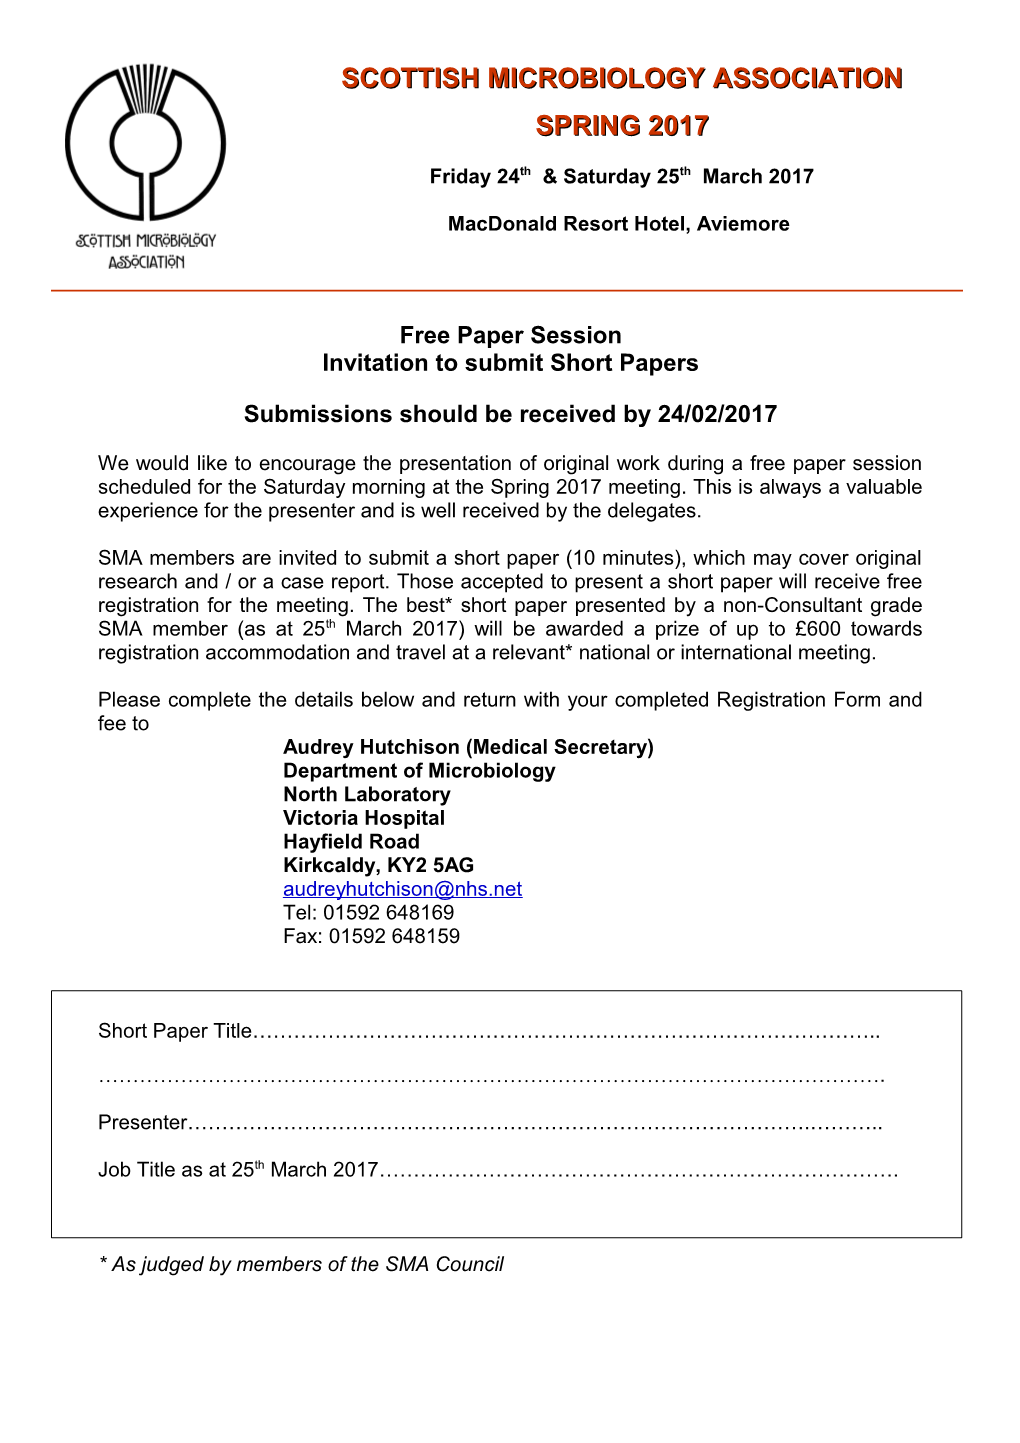 Invitation to Submit Short Papers